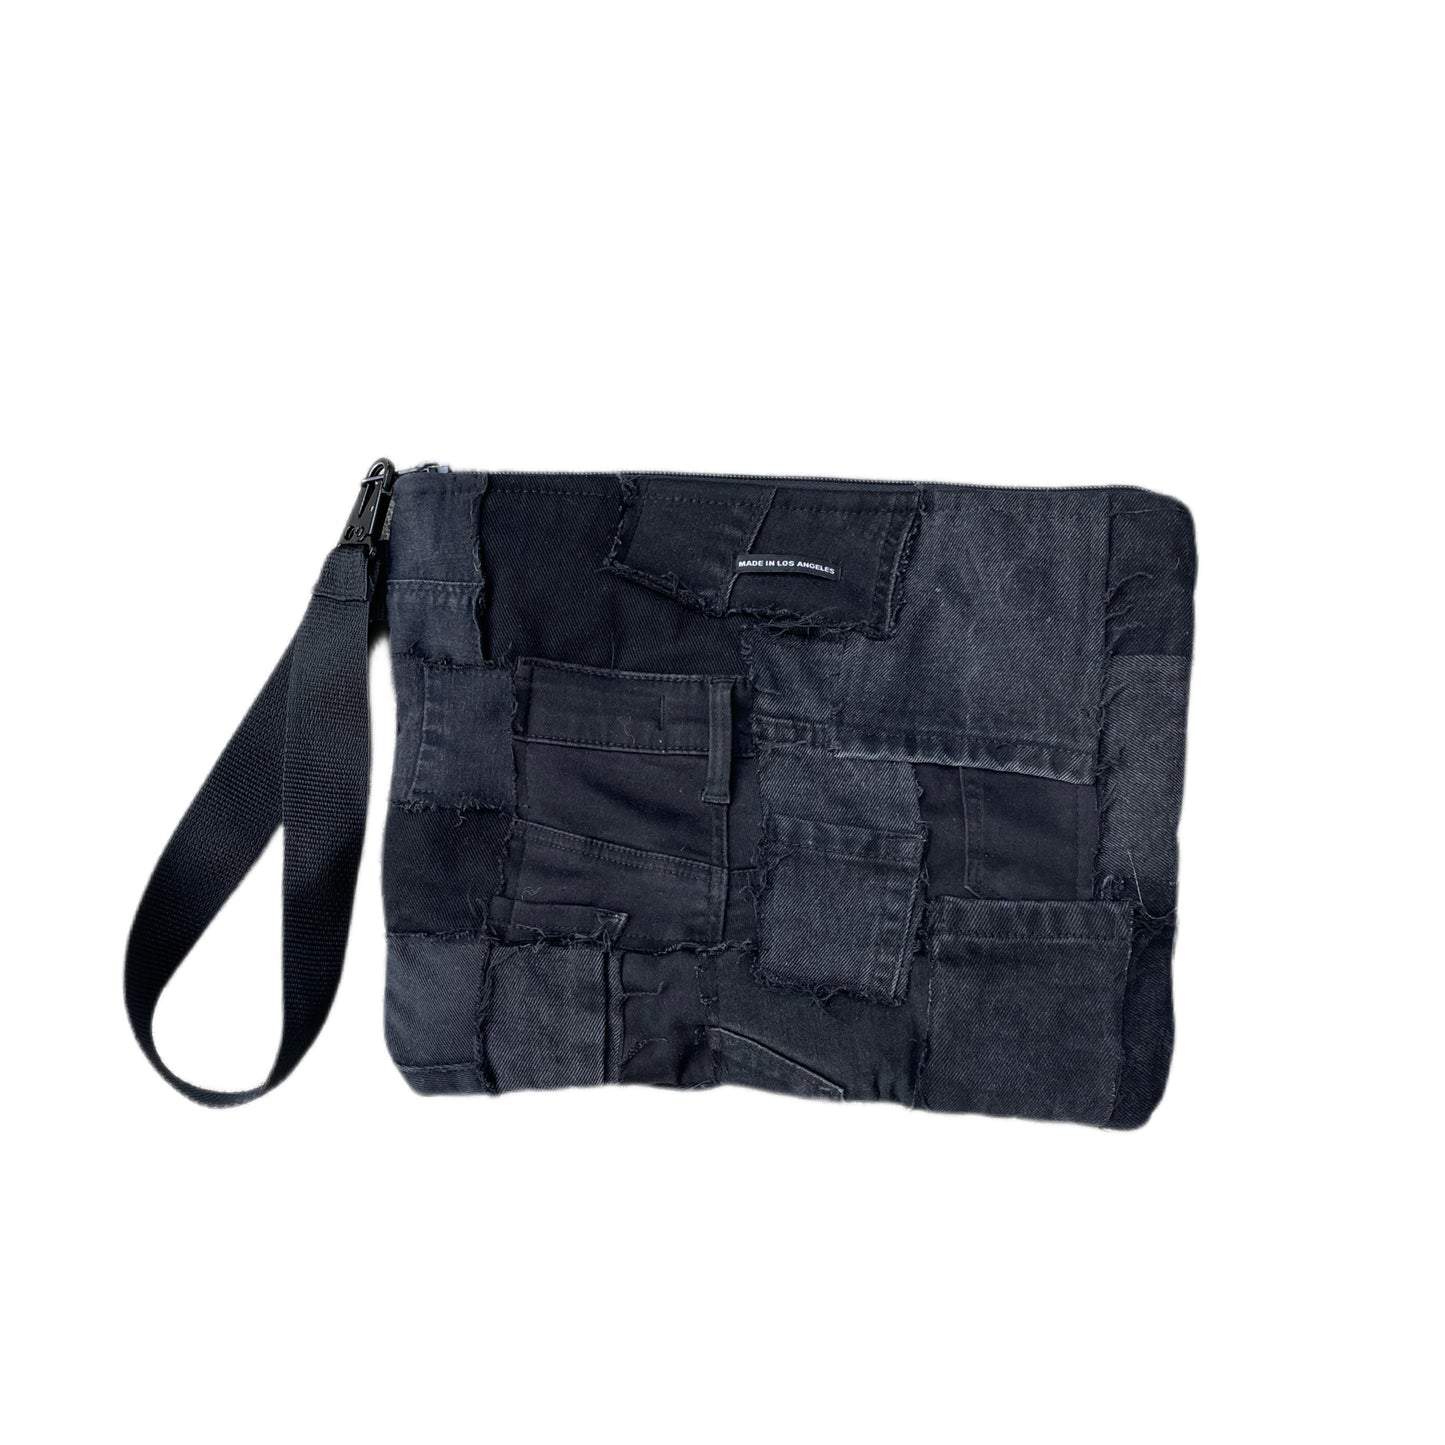 Multifunctional Upcycled Denim Pouch